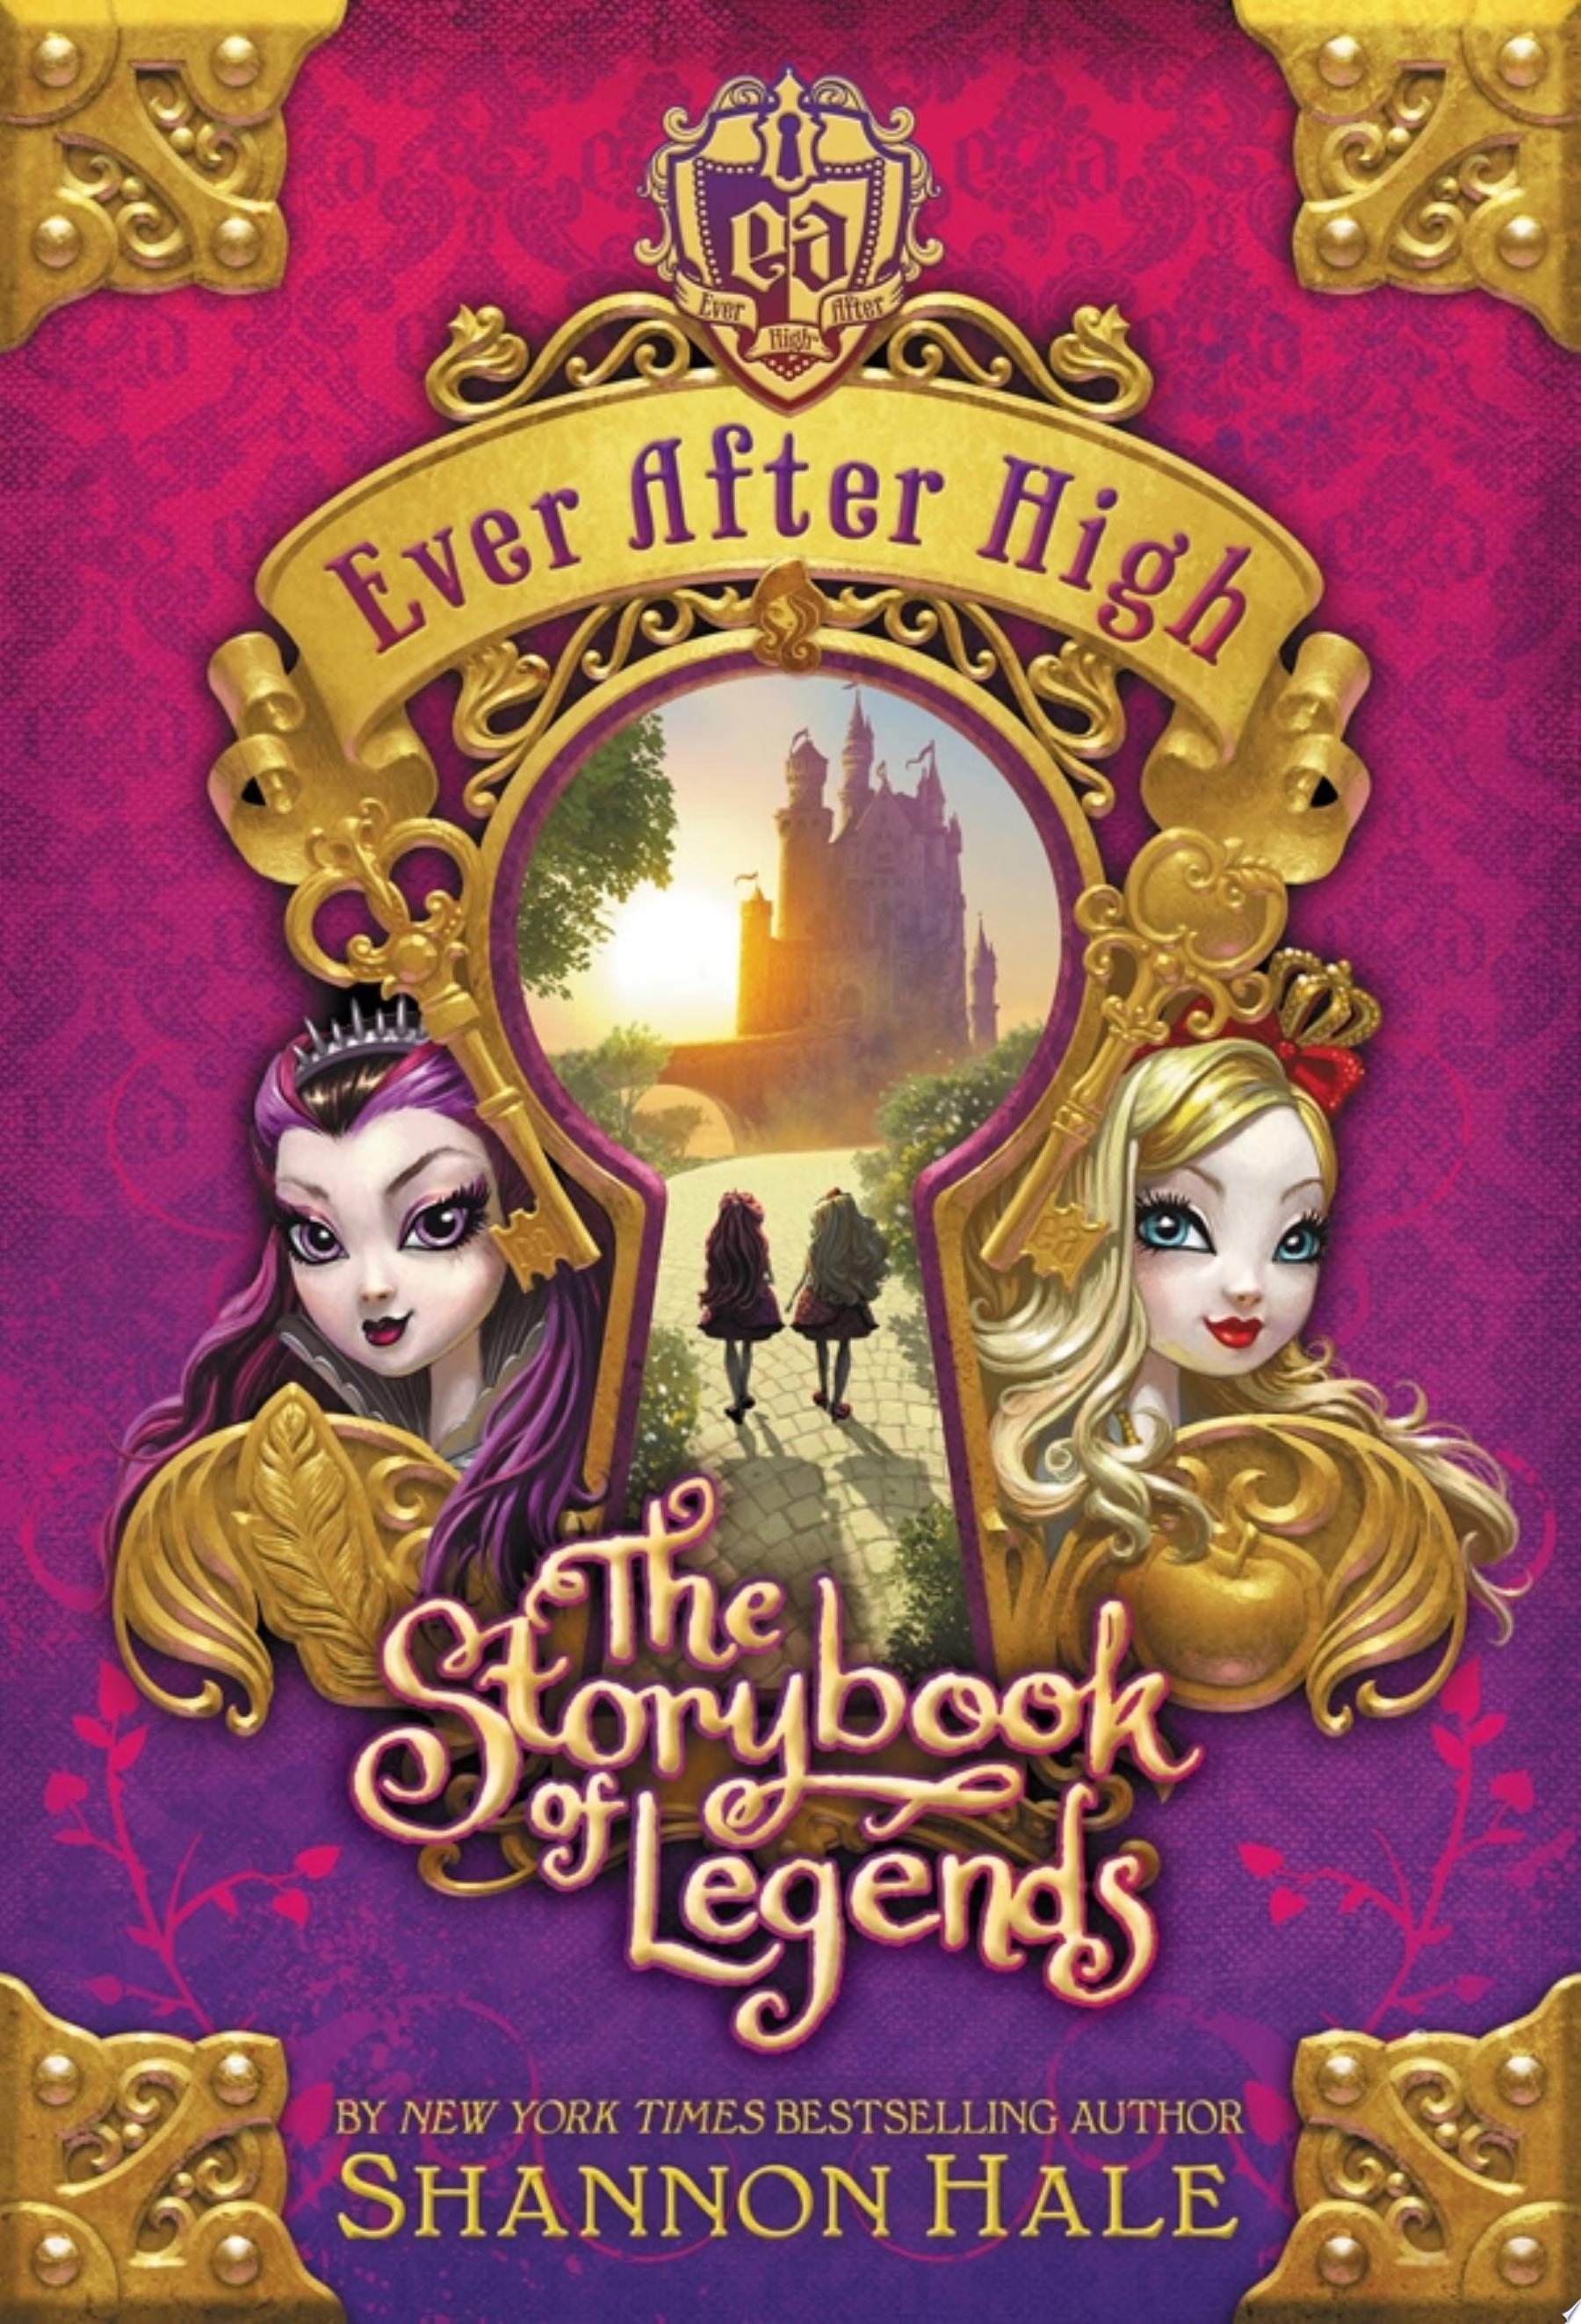 Image for "Ever After High: The Storybook of Legends"